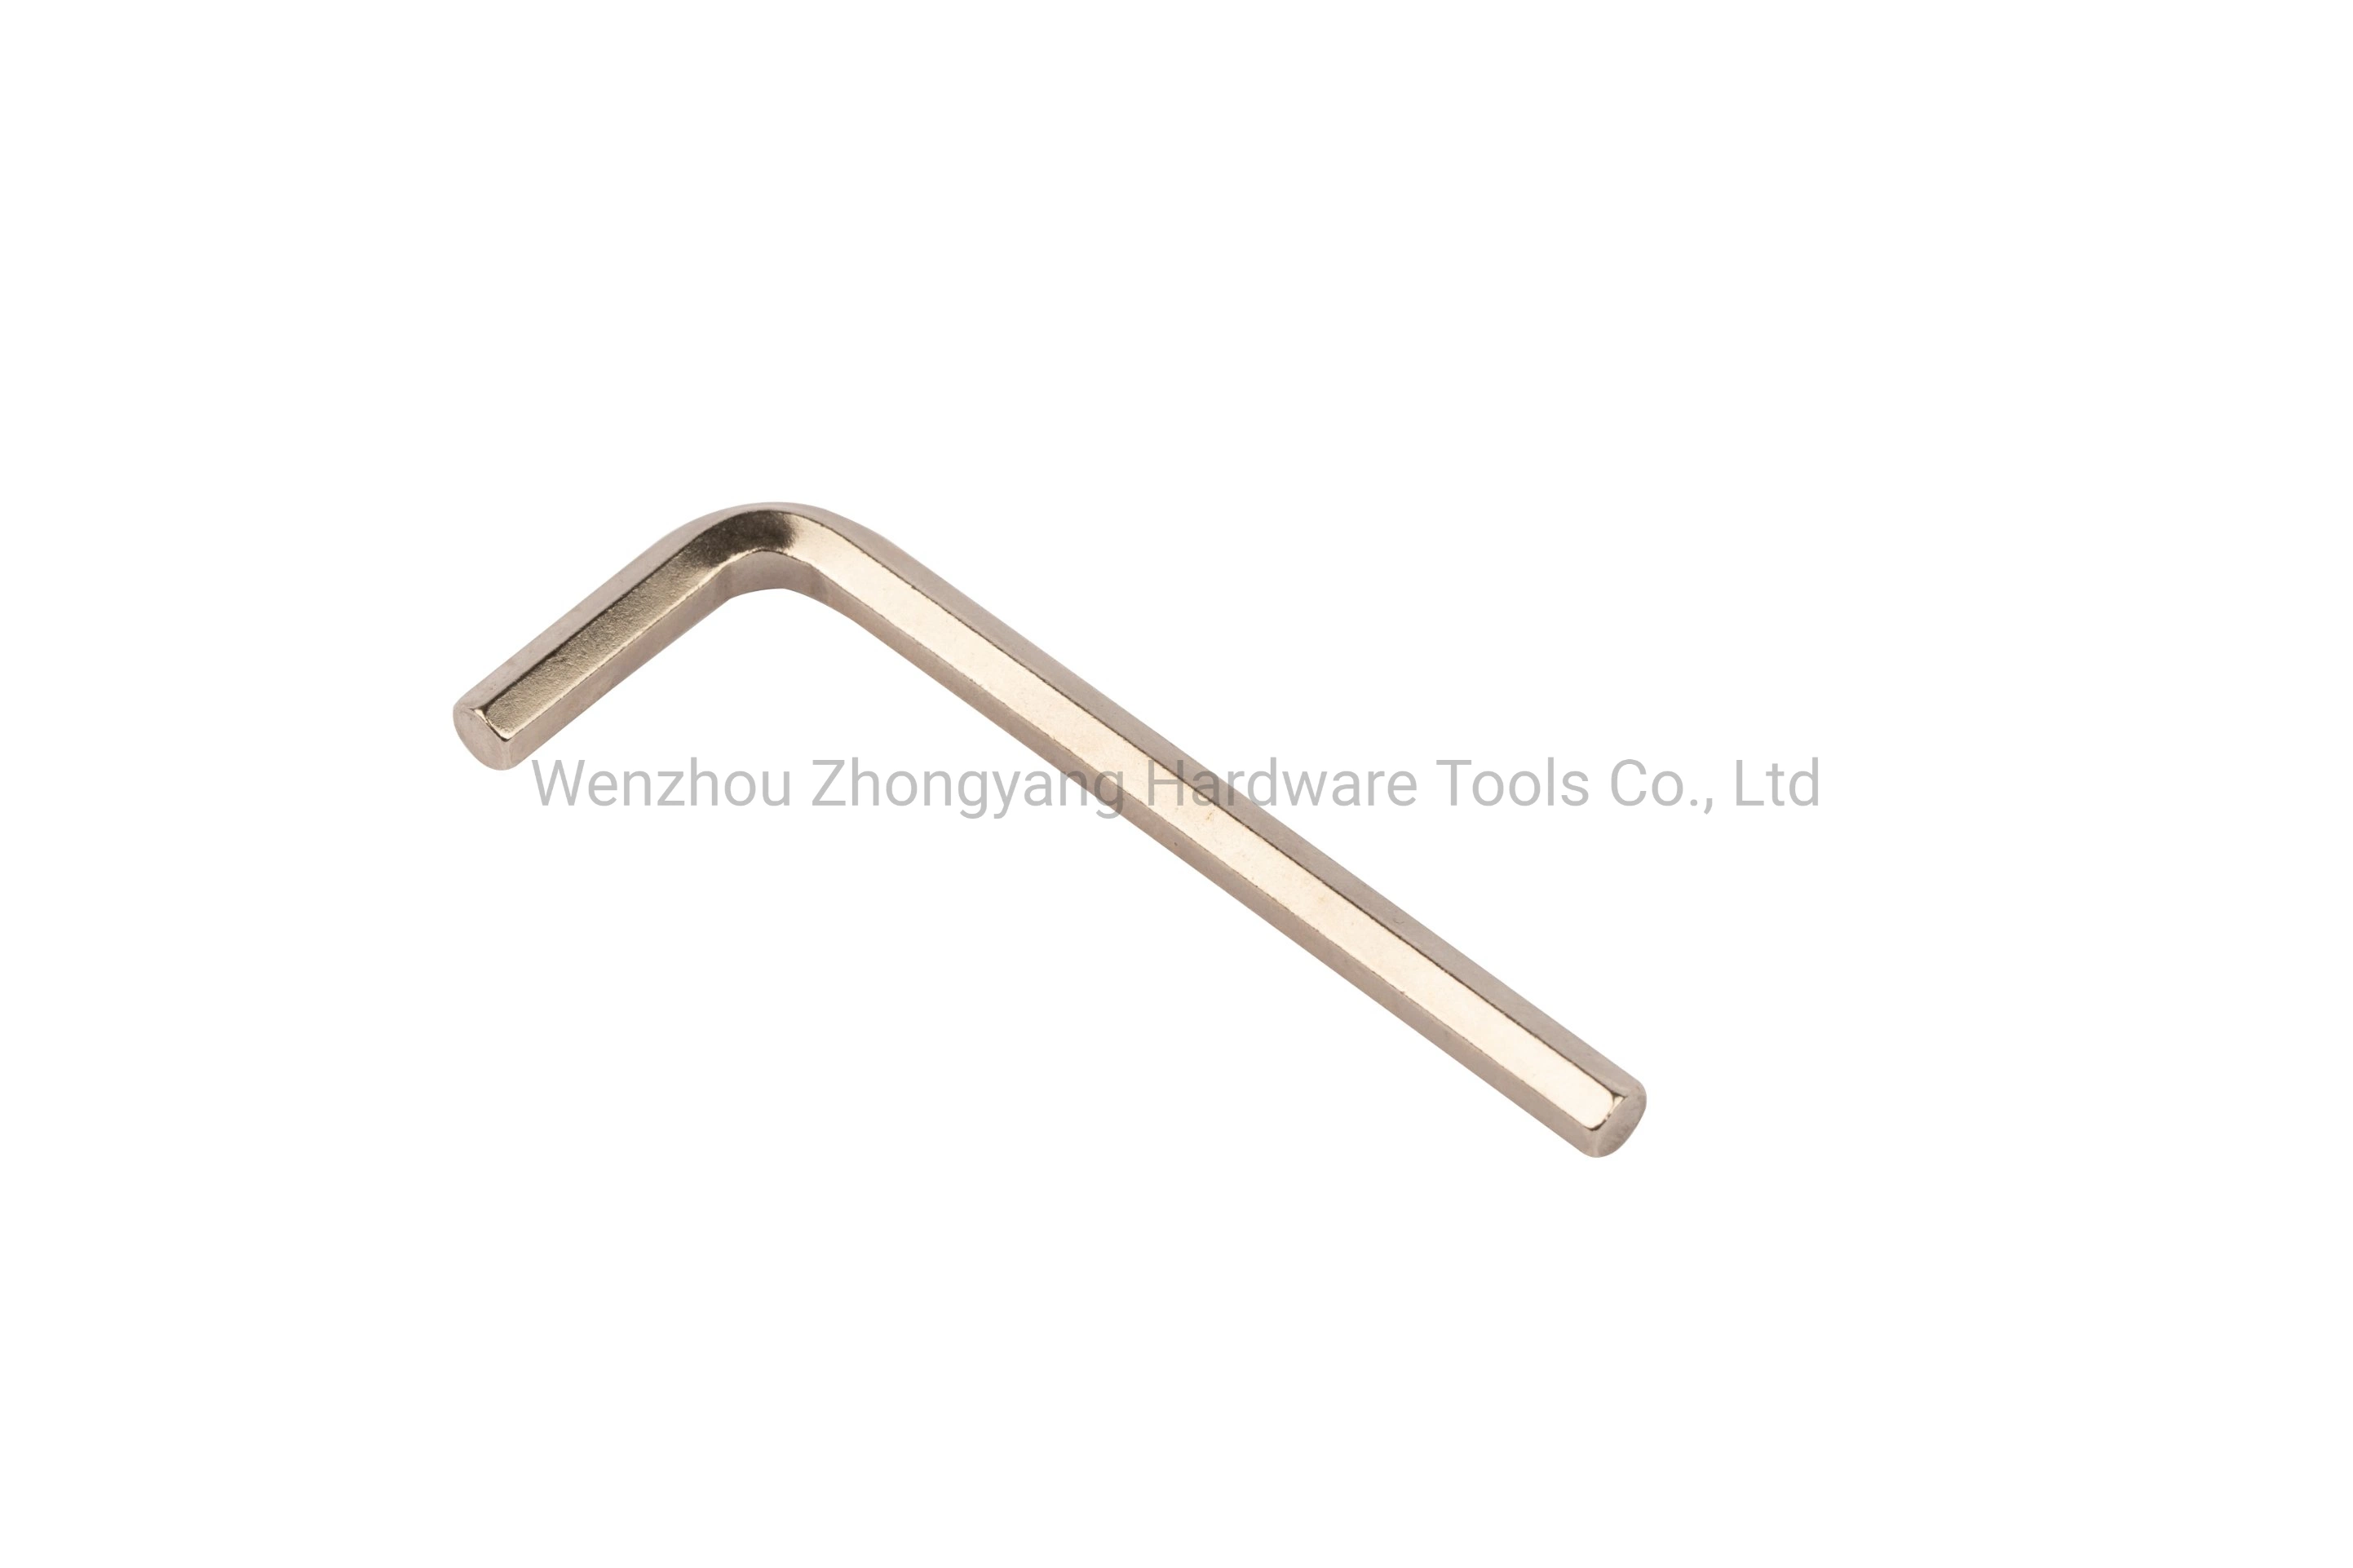 Allen Hex Wrench Hand Tool &ldquo; L&rdquor; Type Allen Key From Chinese Factory.